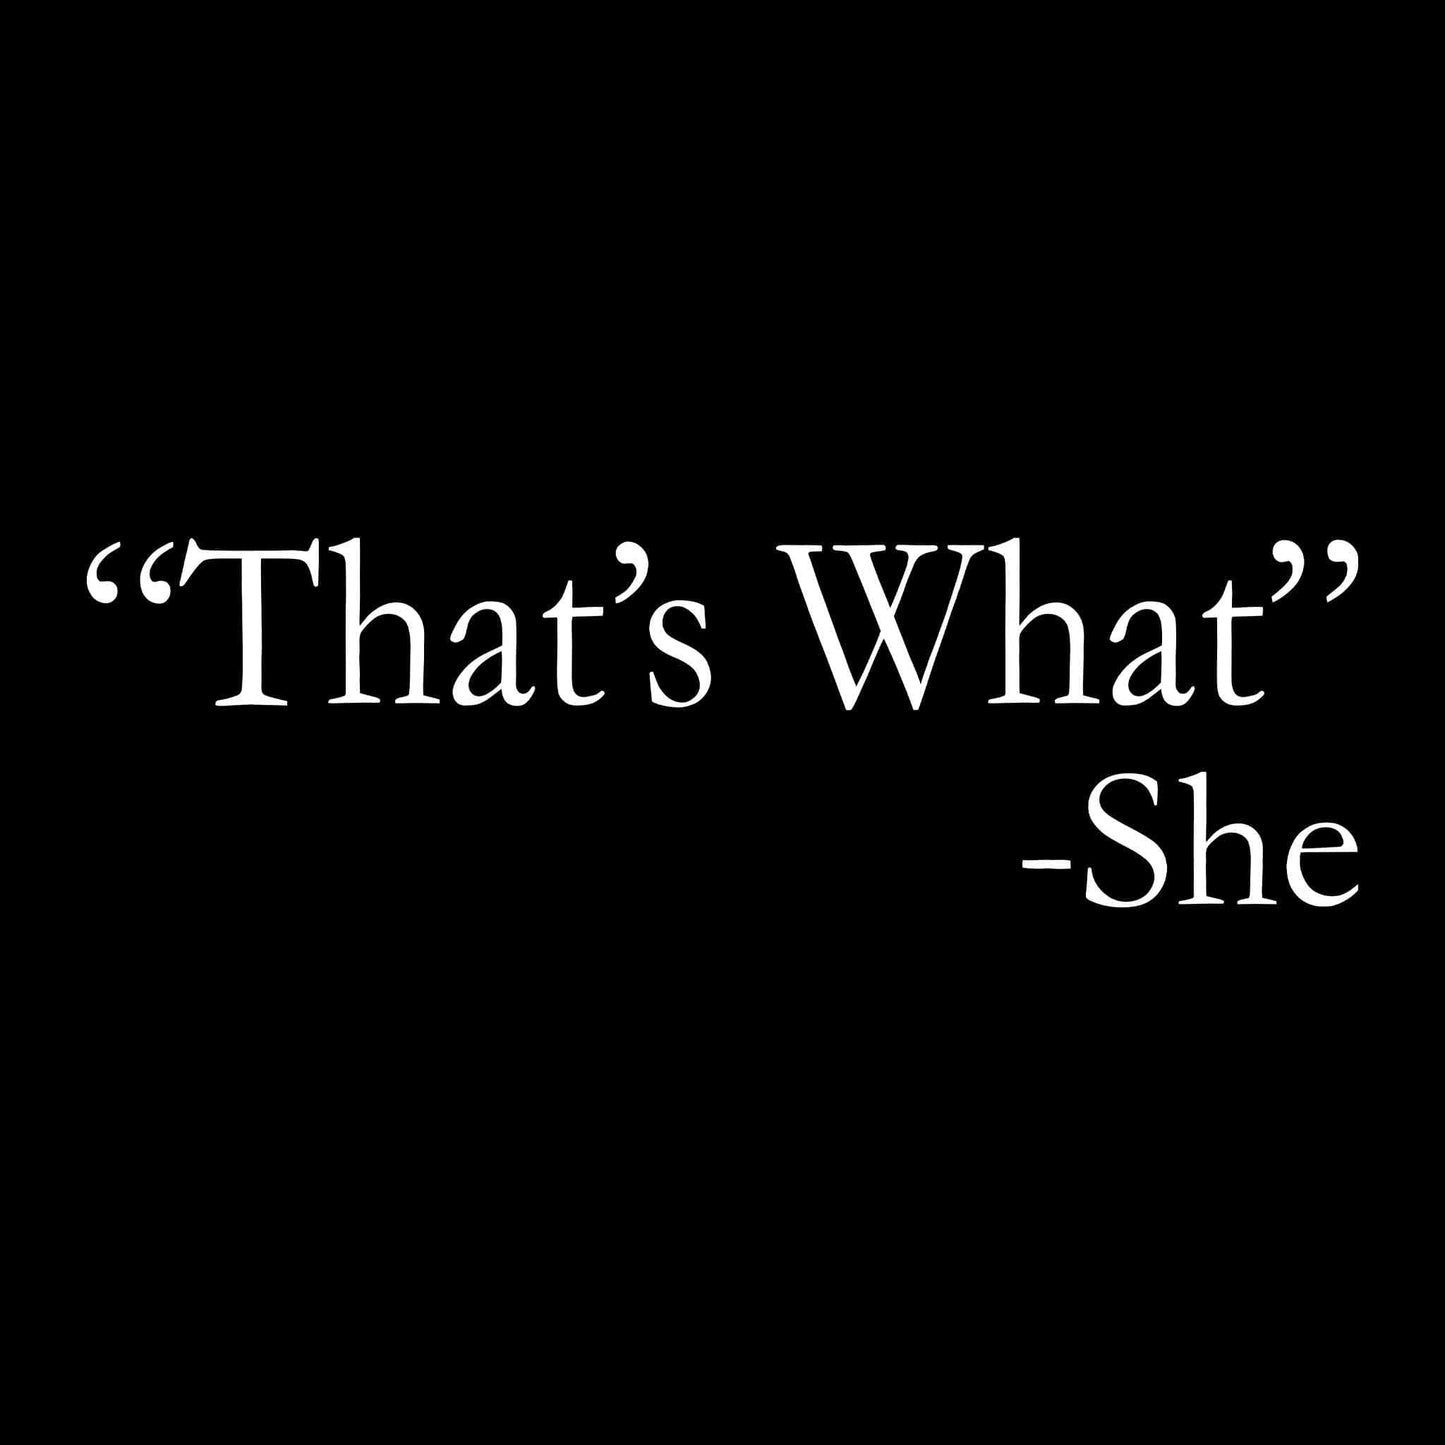 "That's What" -She T-Shirt